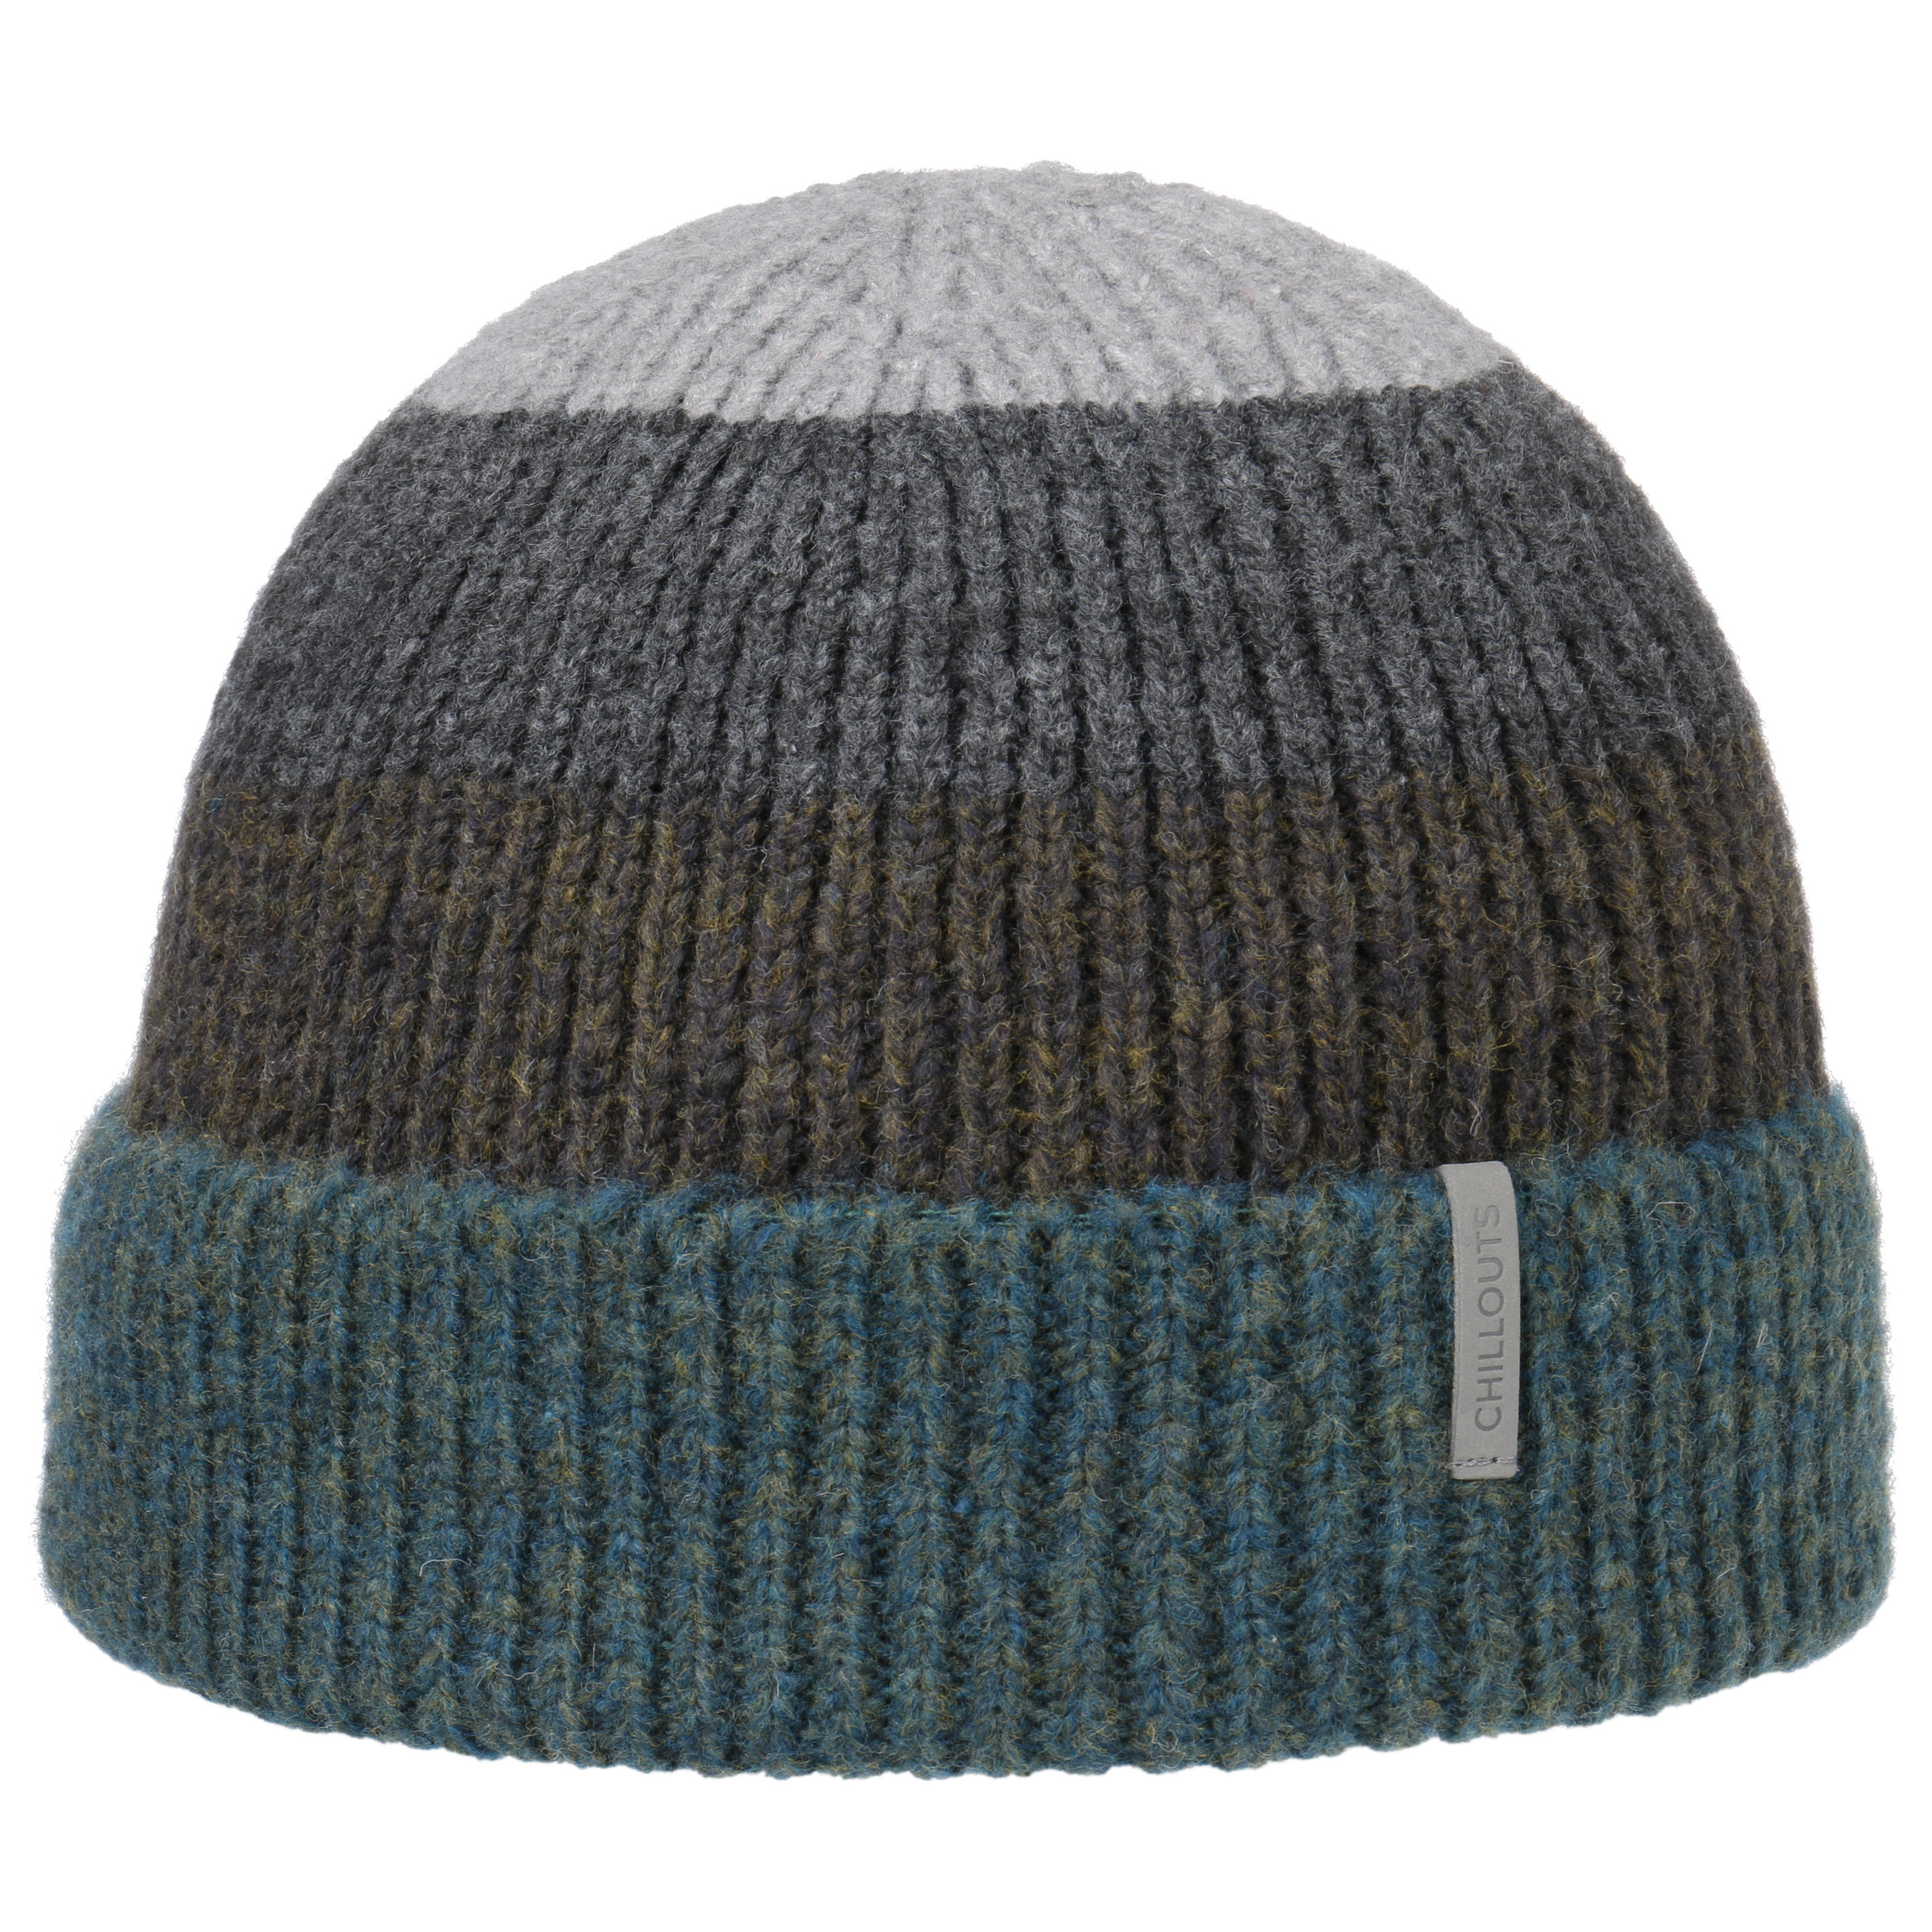 24,99 Fritz - Chillouts € Beanie by